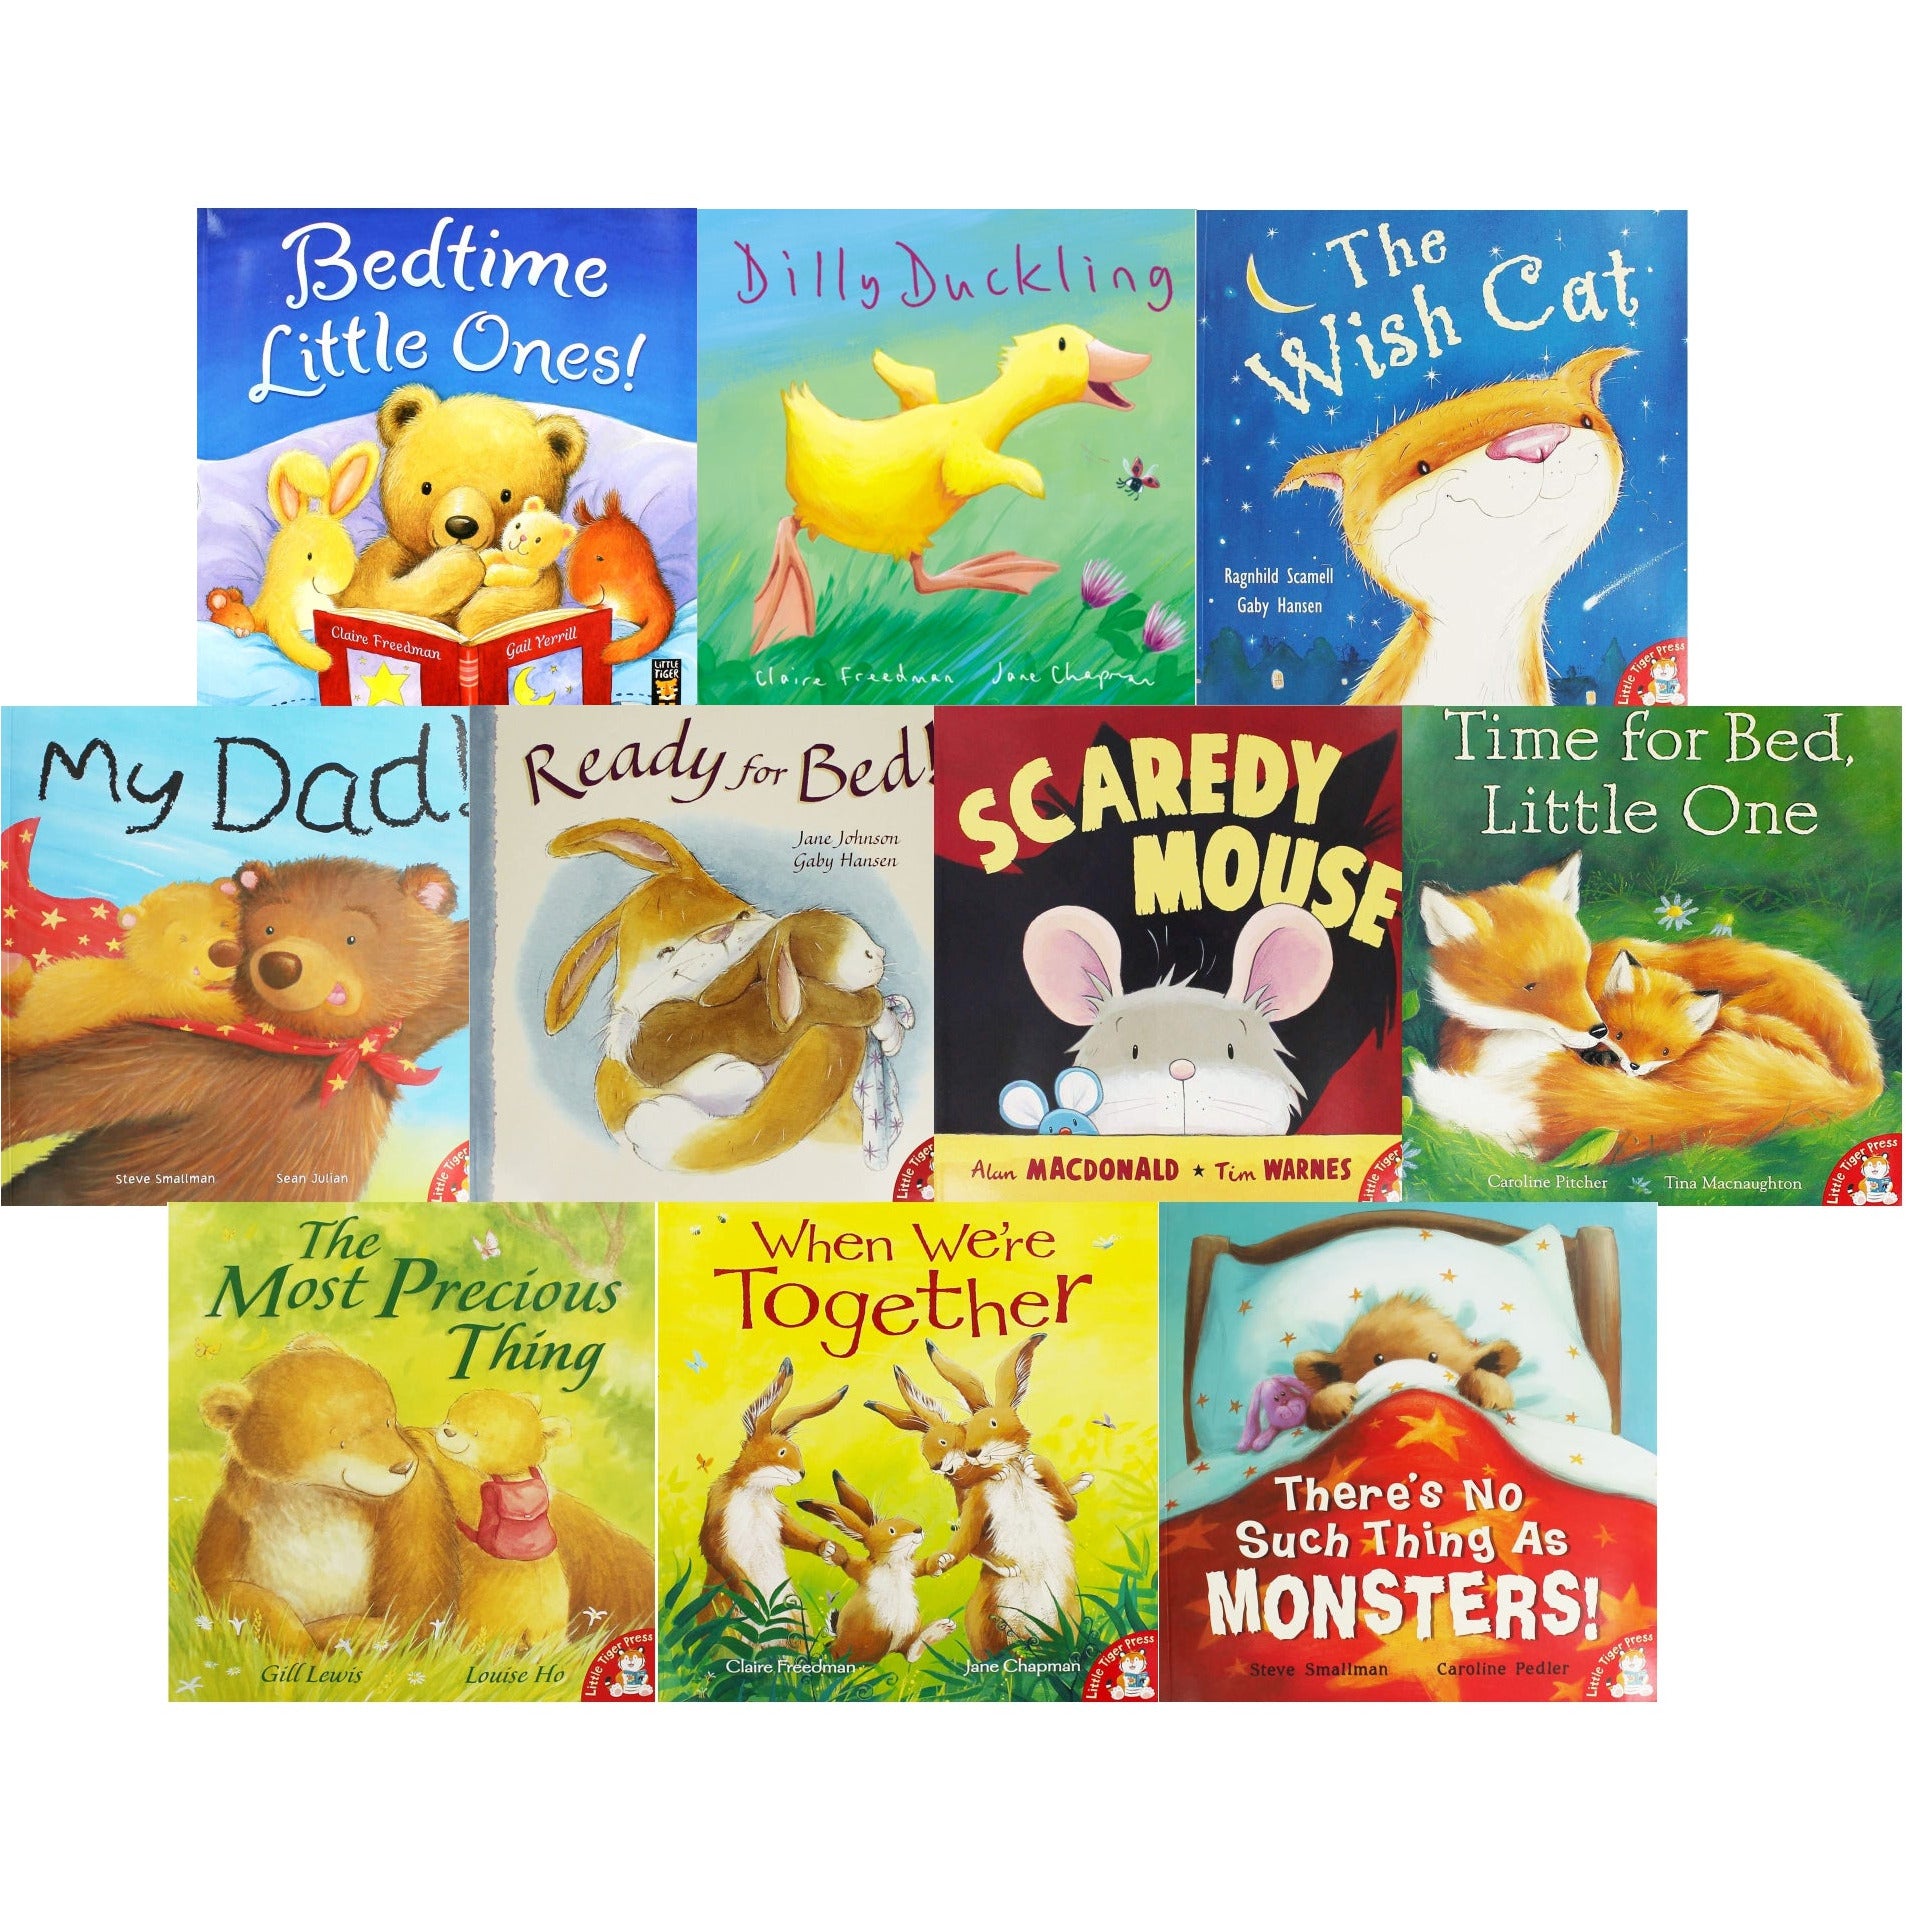 Reader　(Age　Library　Series　Set　Bedtime　Stories　Collection　Books　10　0-5)　Flat　Picture　Children　Early